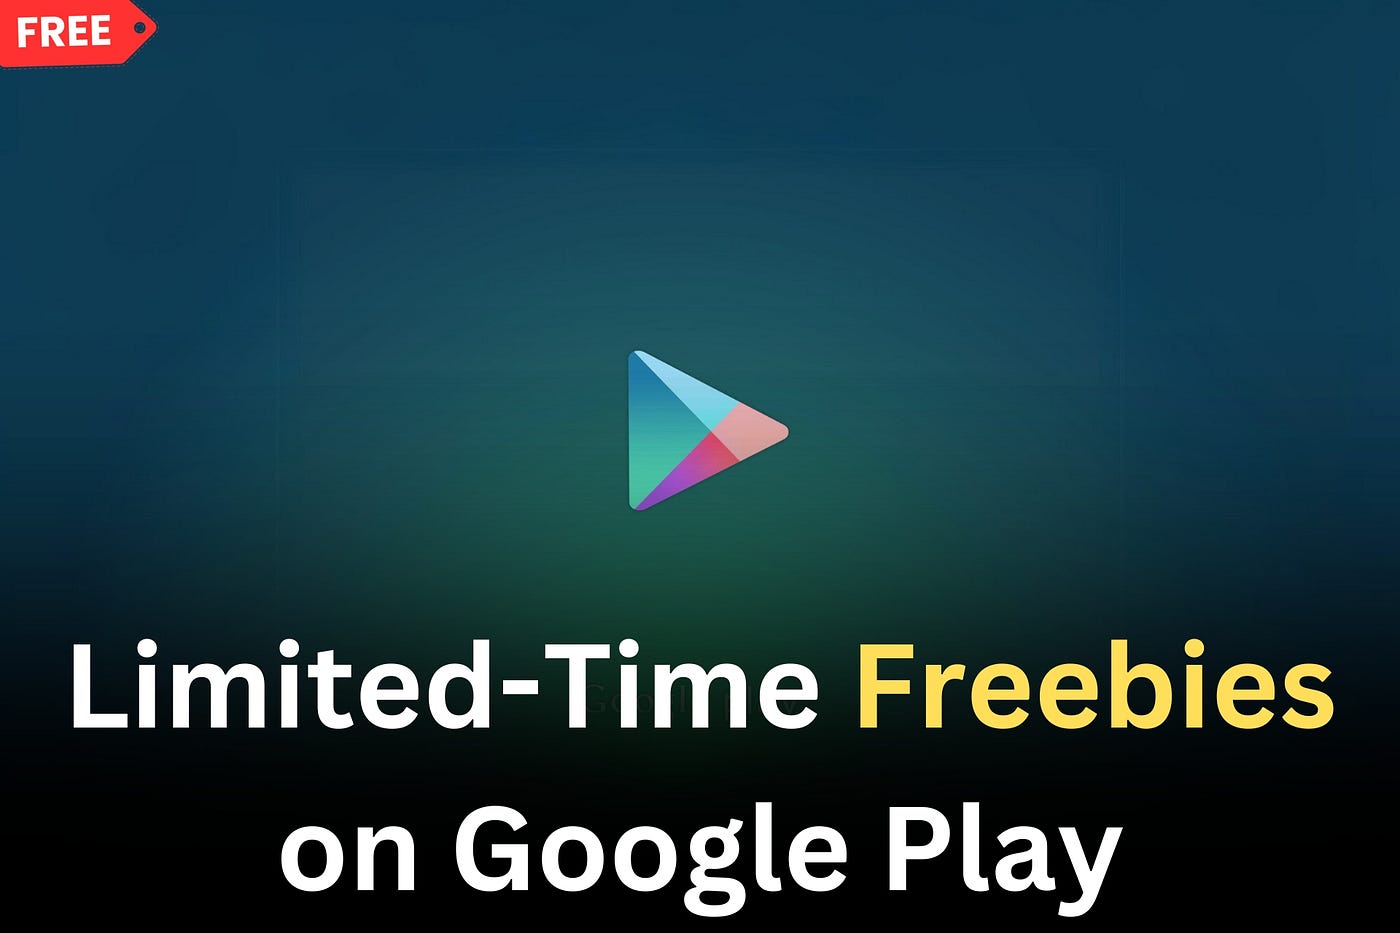 TimeSoft - Apps on Google Play